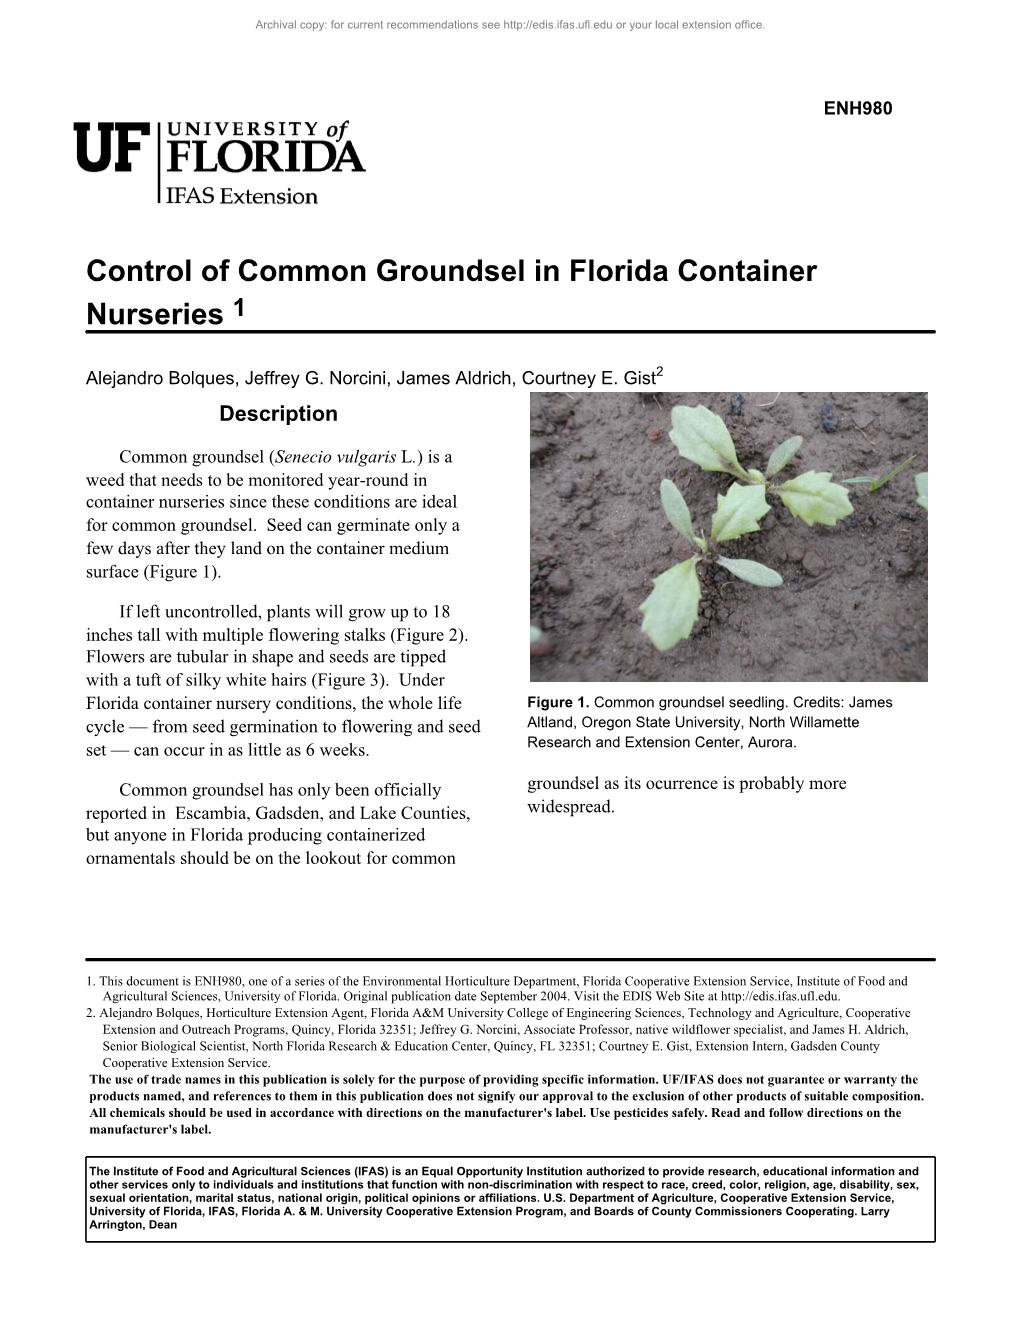 Control of Common Groundsel in Florida Container Nurseries 1